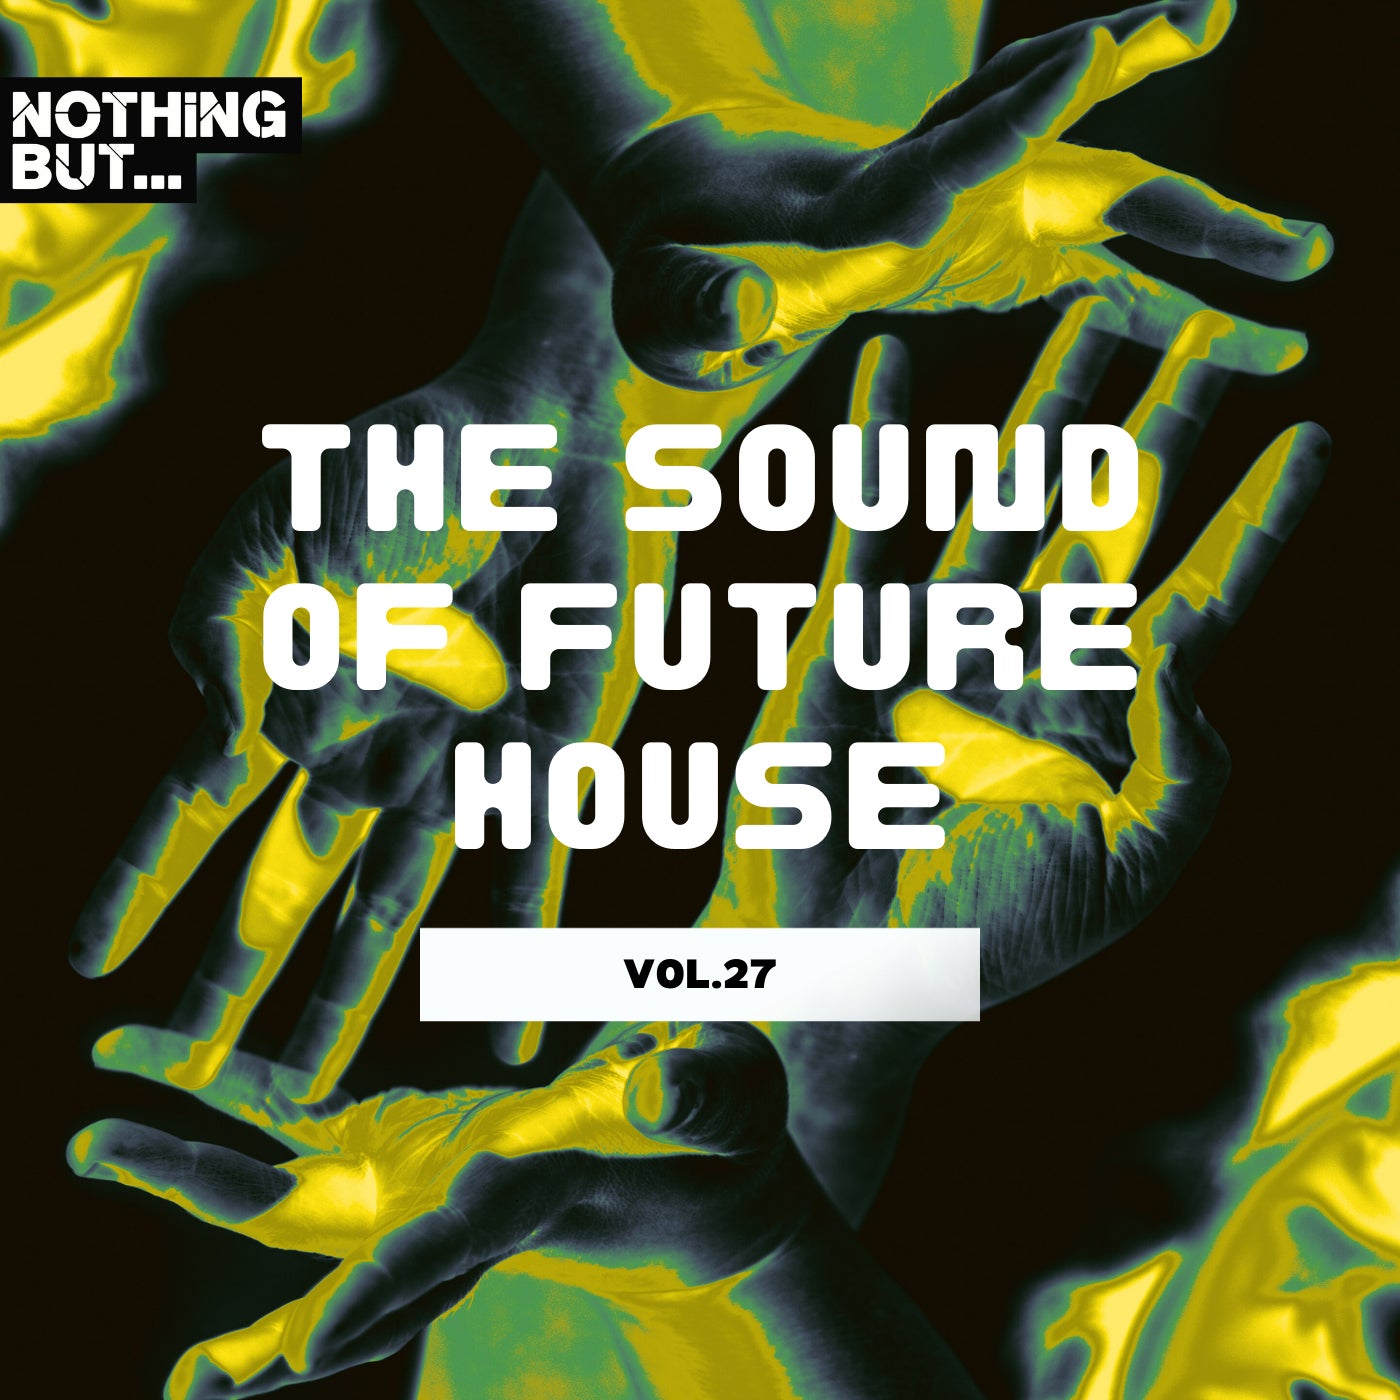 Nothing But... The Sound of Future House, Vol. 27